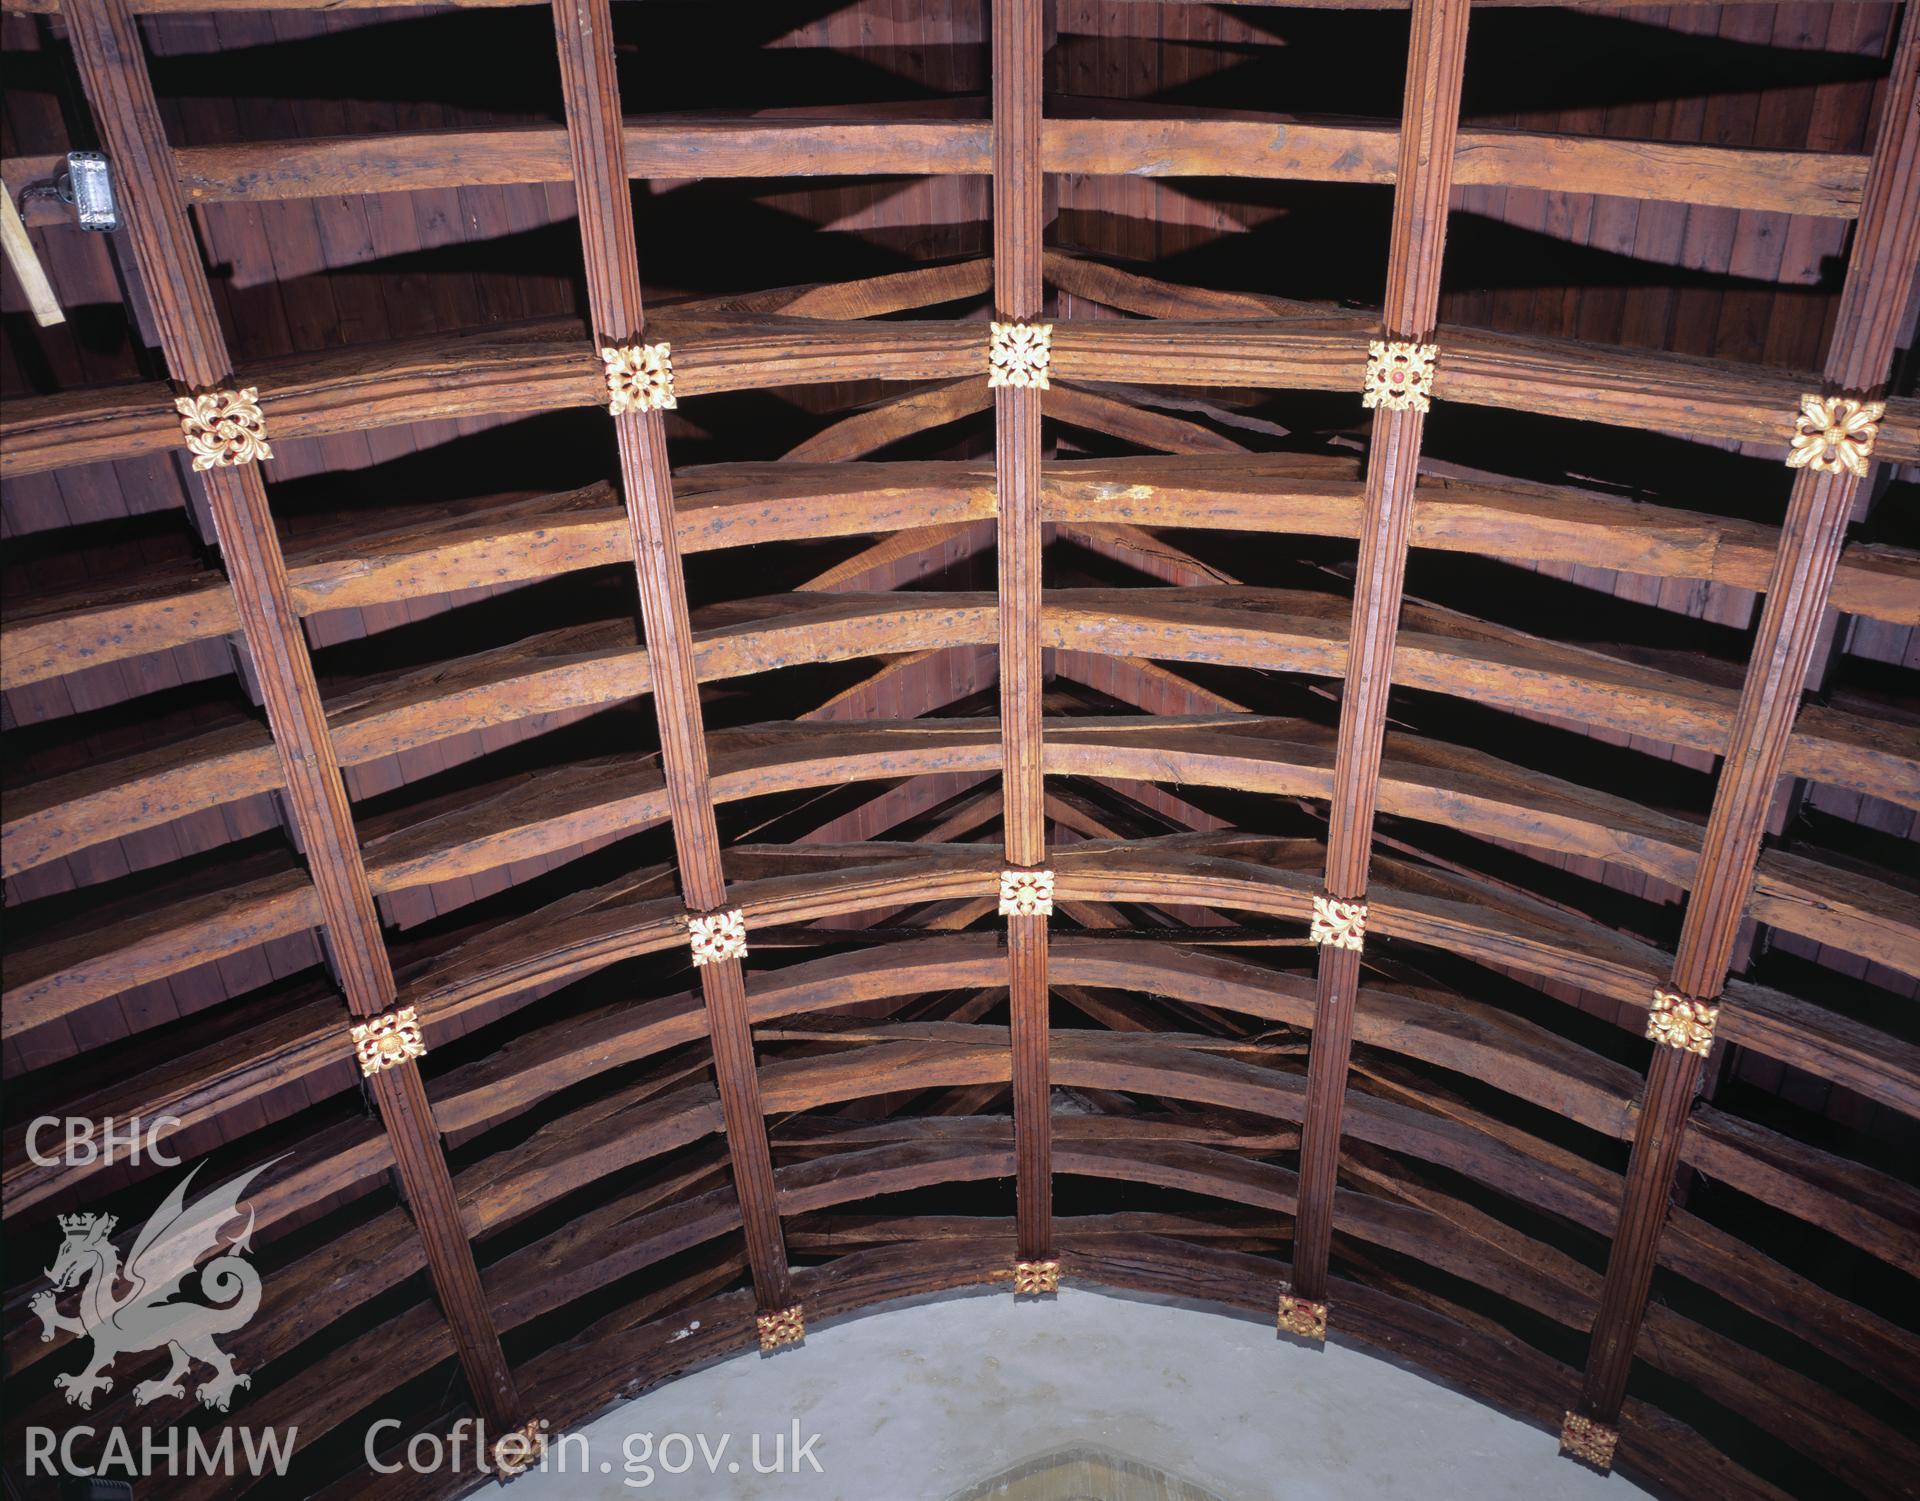 Colour transparency showing a view of the chancel roof at St John the Baptist Church, Newton Nottage, produced by Iain Wright 2004